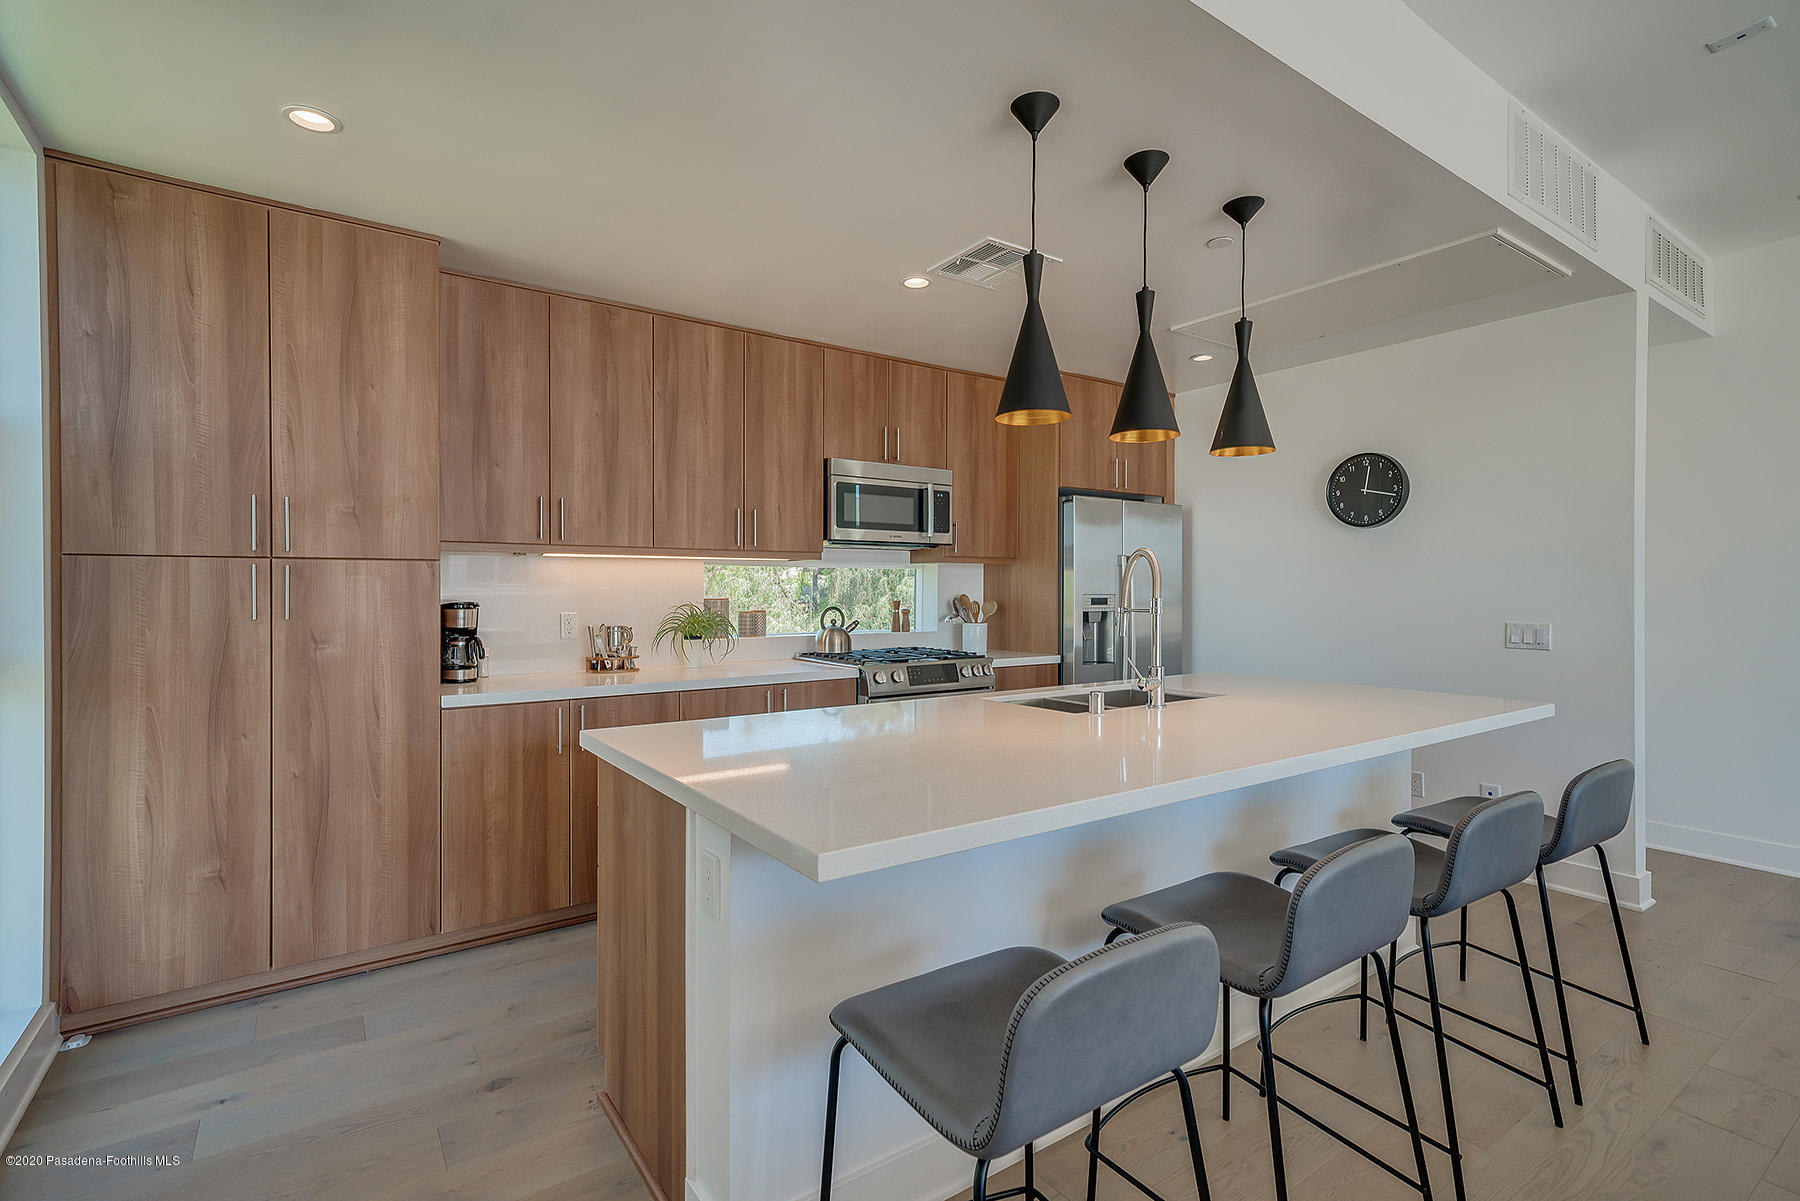 a kitchen with stainless steel appliances a table chairs and chandelier